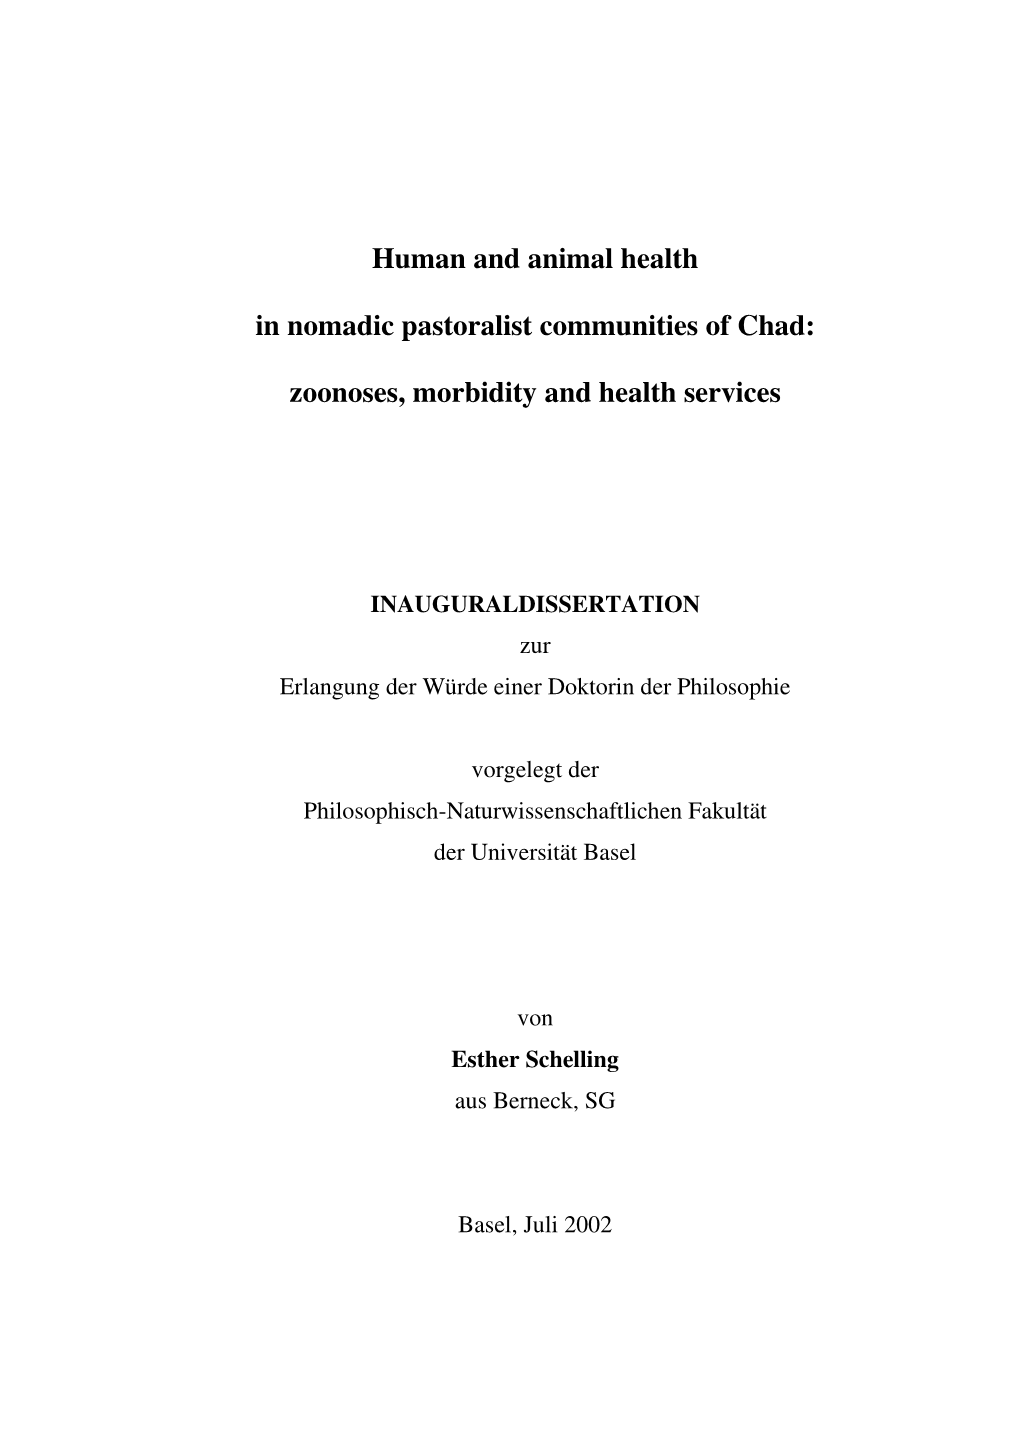 Human and Animal Health in Nomadic Pastoralist Communities of Chad